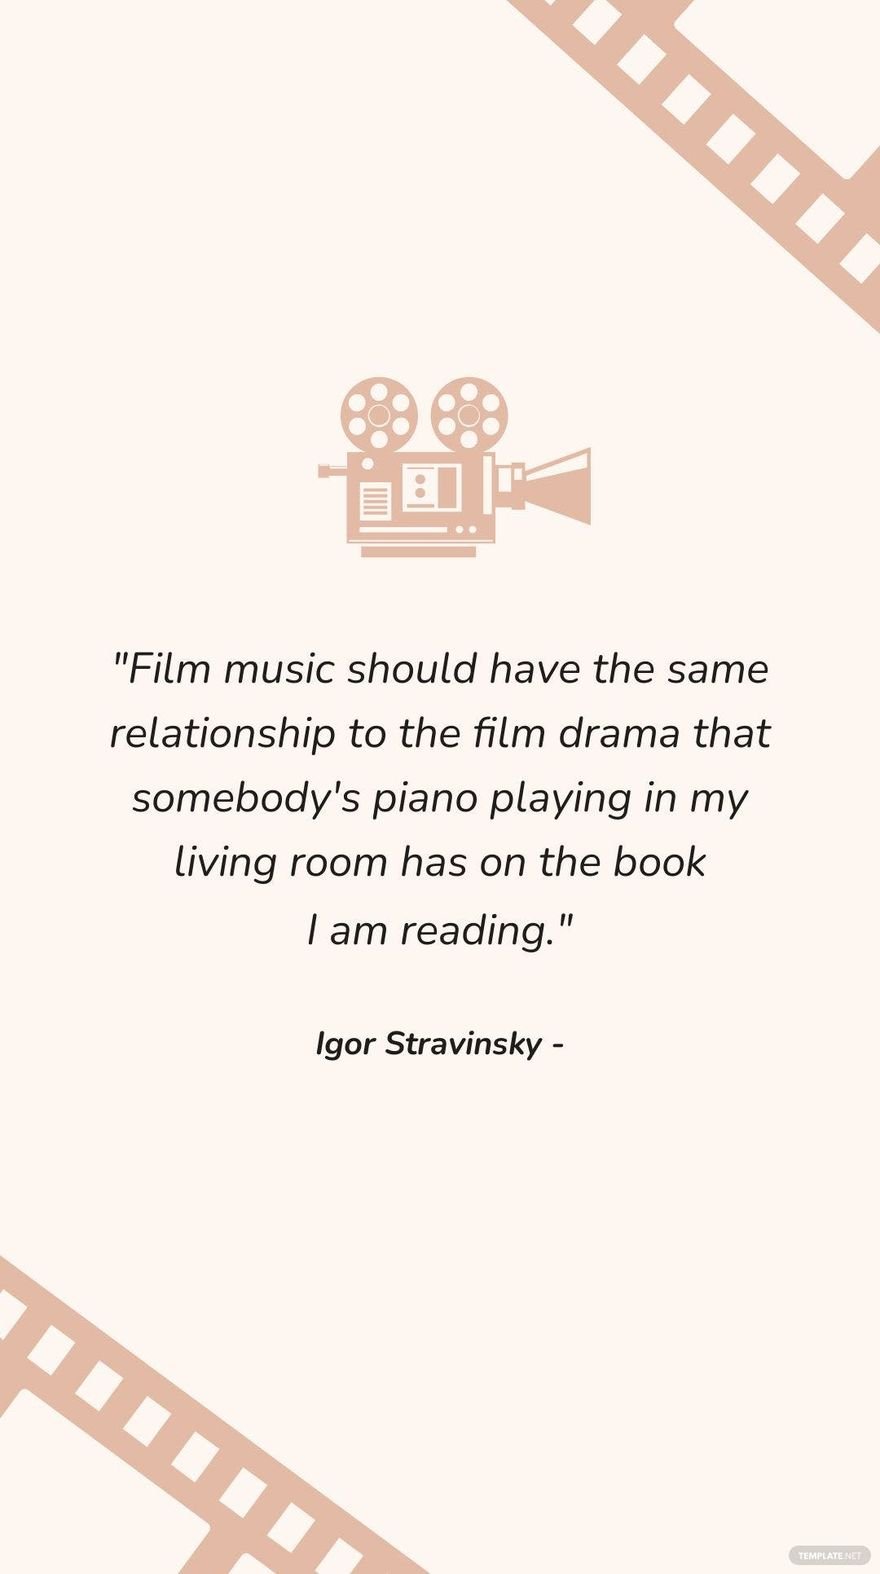 Igor Stravinsky  Film music should have the same relationship to the film drama that somebodys piano playing in my living room has on the book I am reading